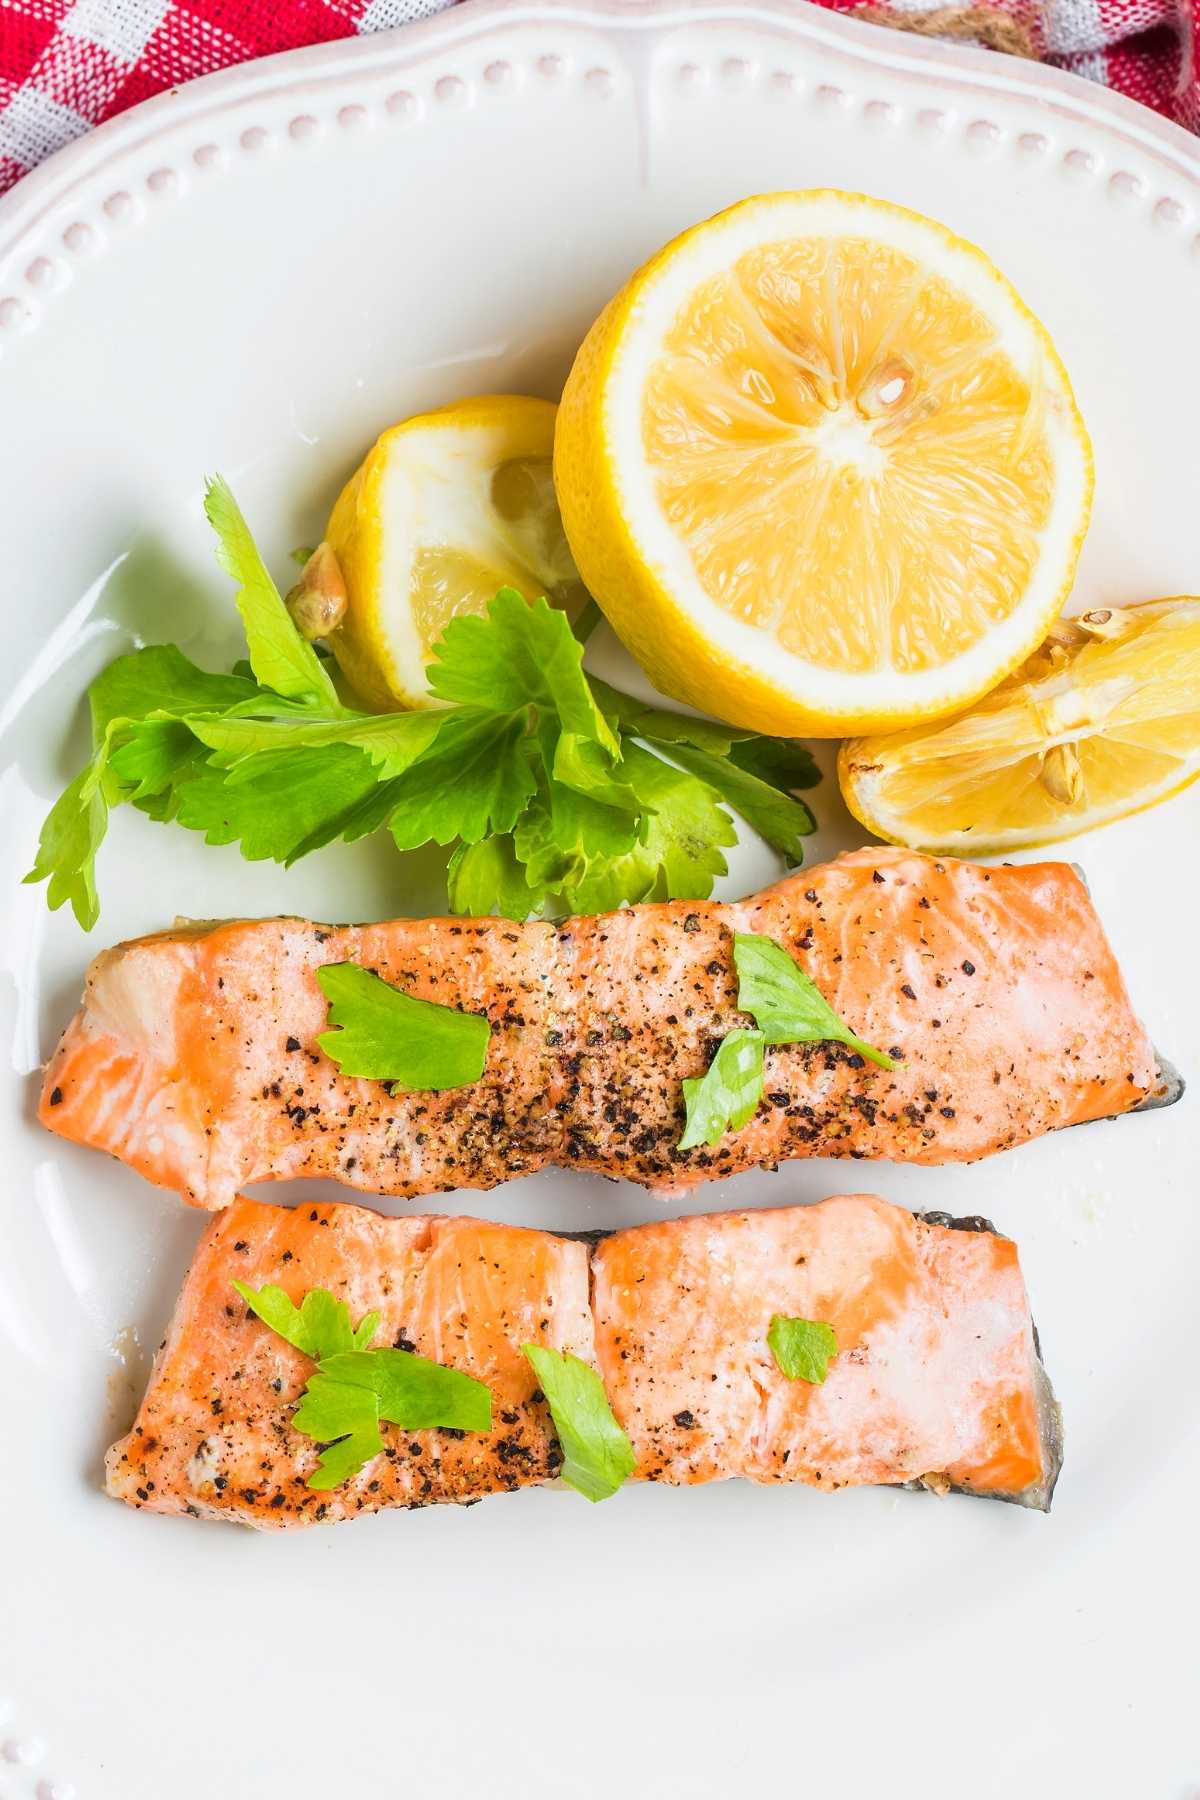 If you’re short on time, this microwave salmon is the perfect solution. It takes less than 10 minutes to make, and you’ll be more than pleased with the results!